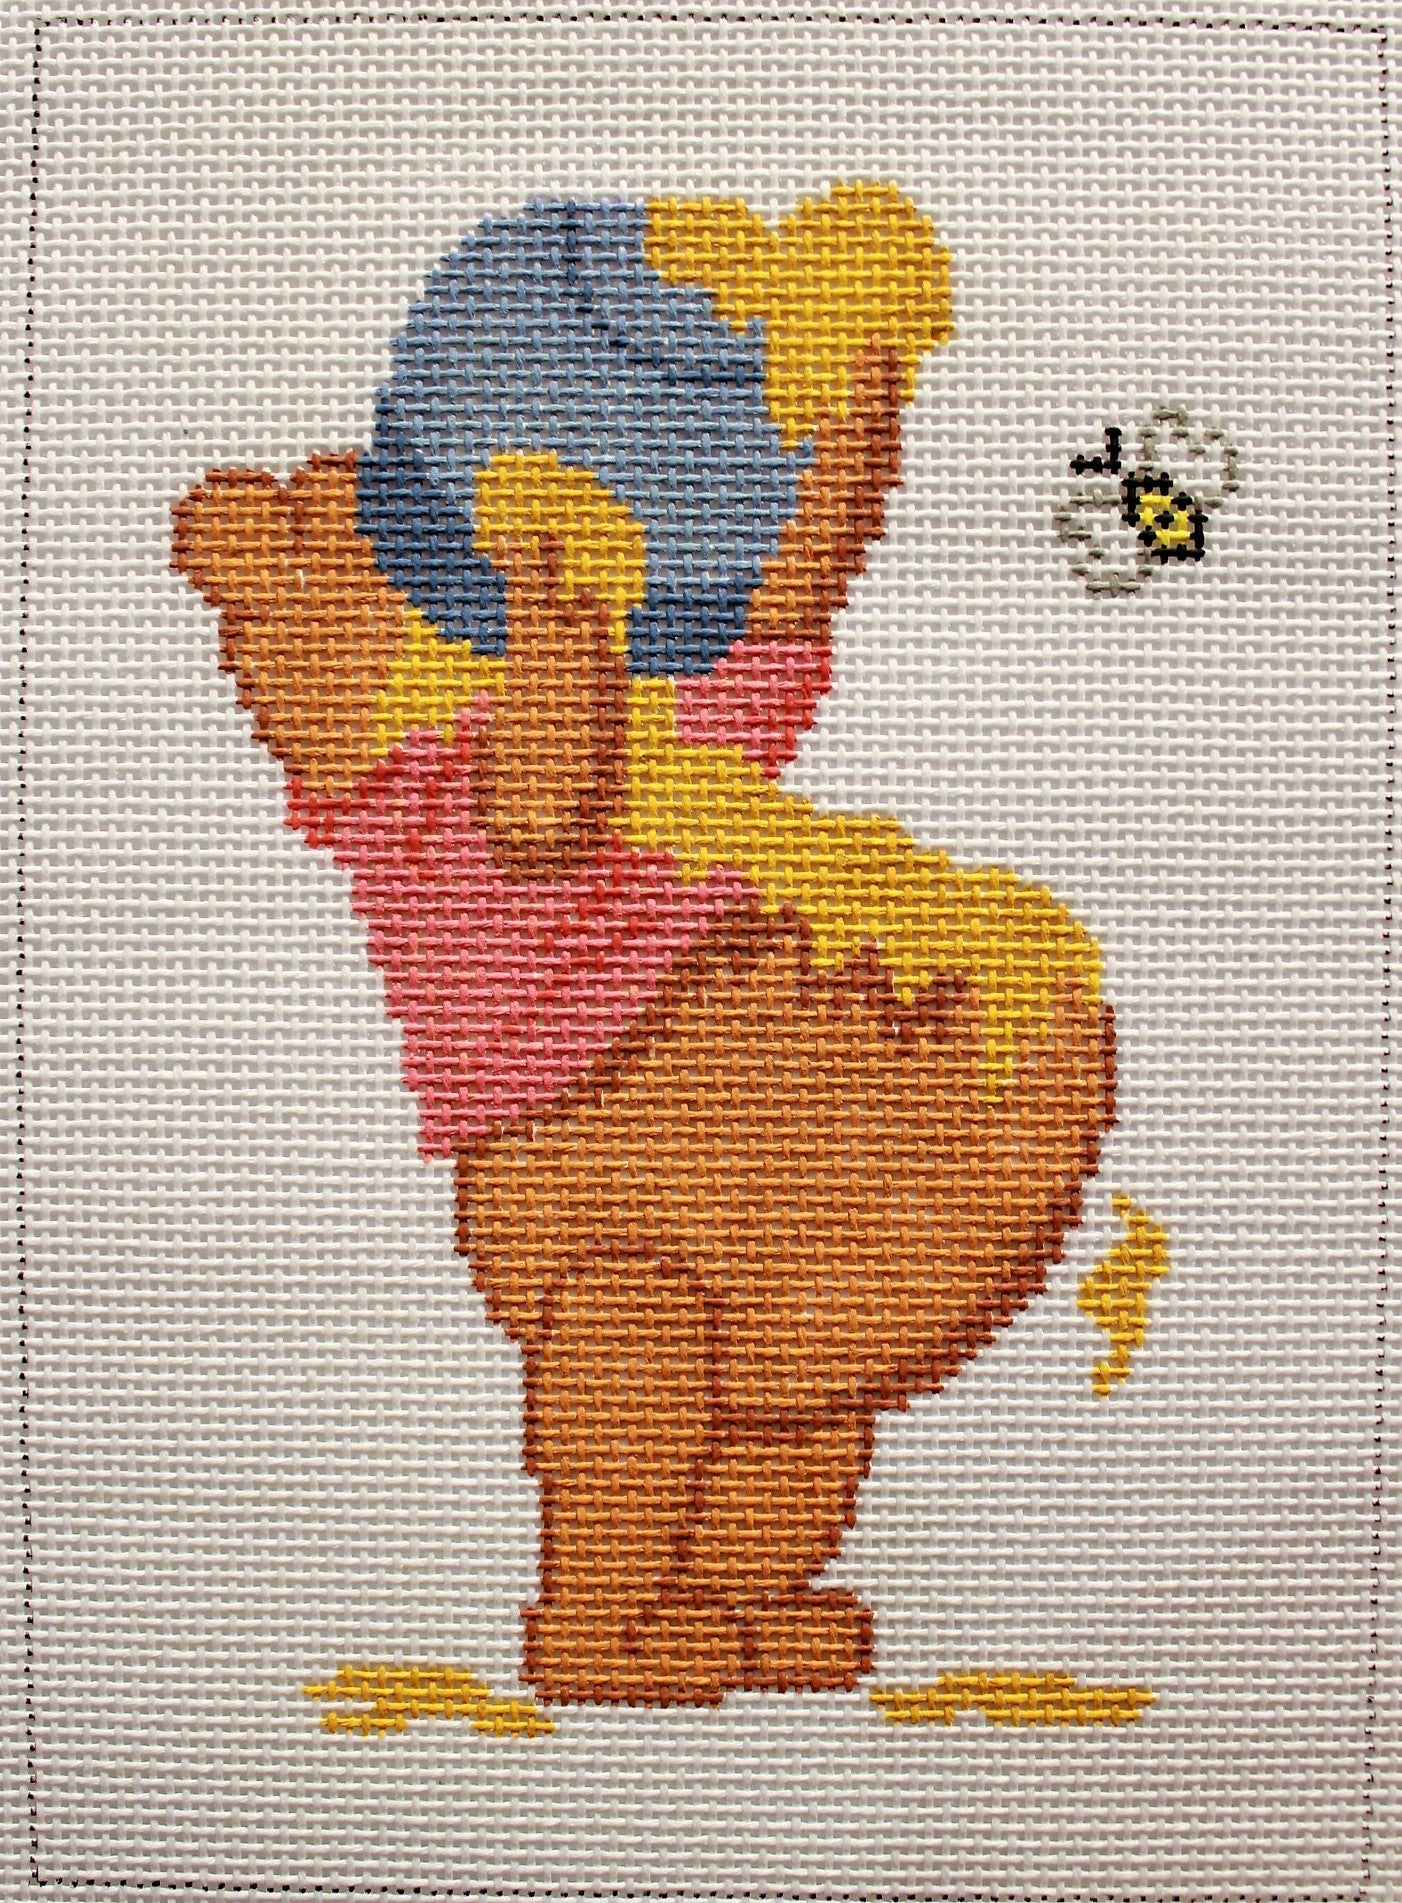 Winnie The Pooh with The Honey Pot Counted Cross Stitch Pattern